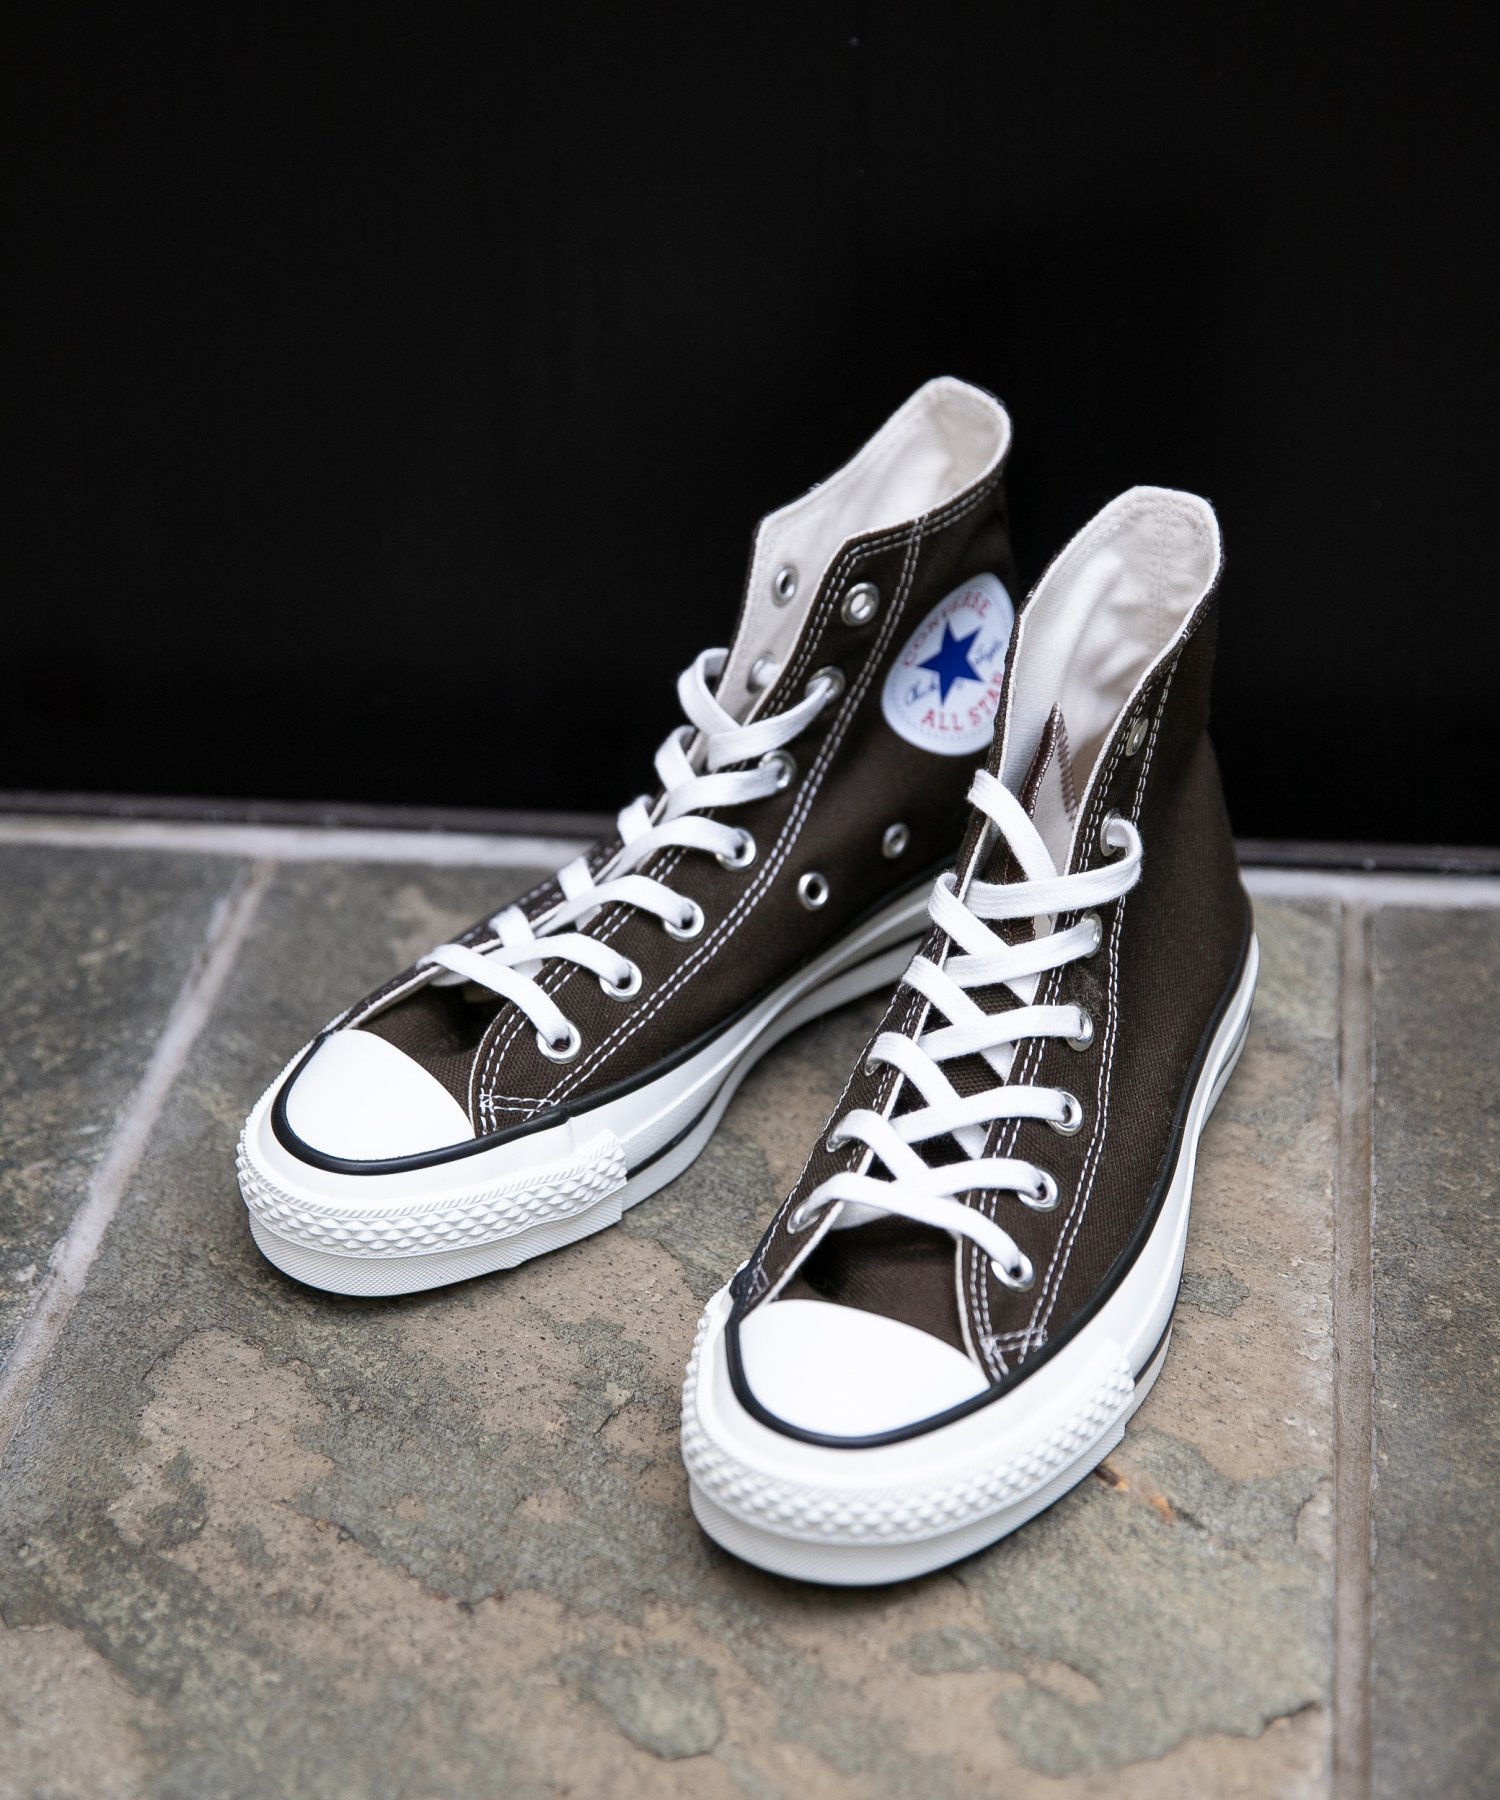 【CONVERSE(コンバース)】ALL STAR MADE IN JAPANモデル 